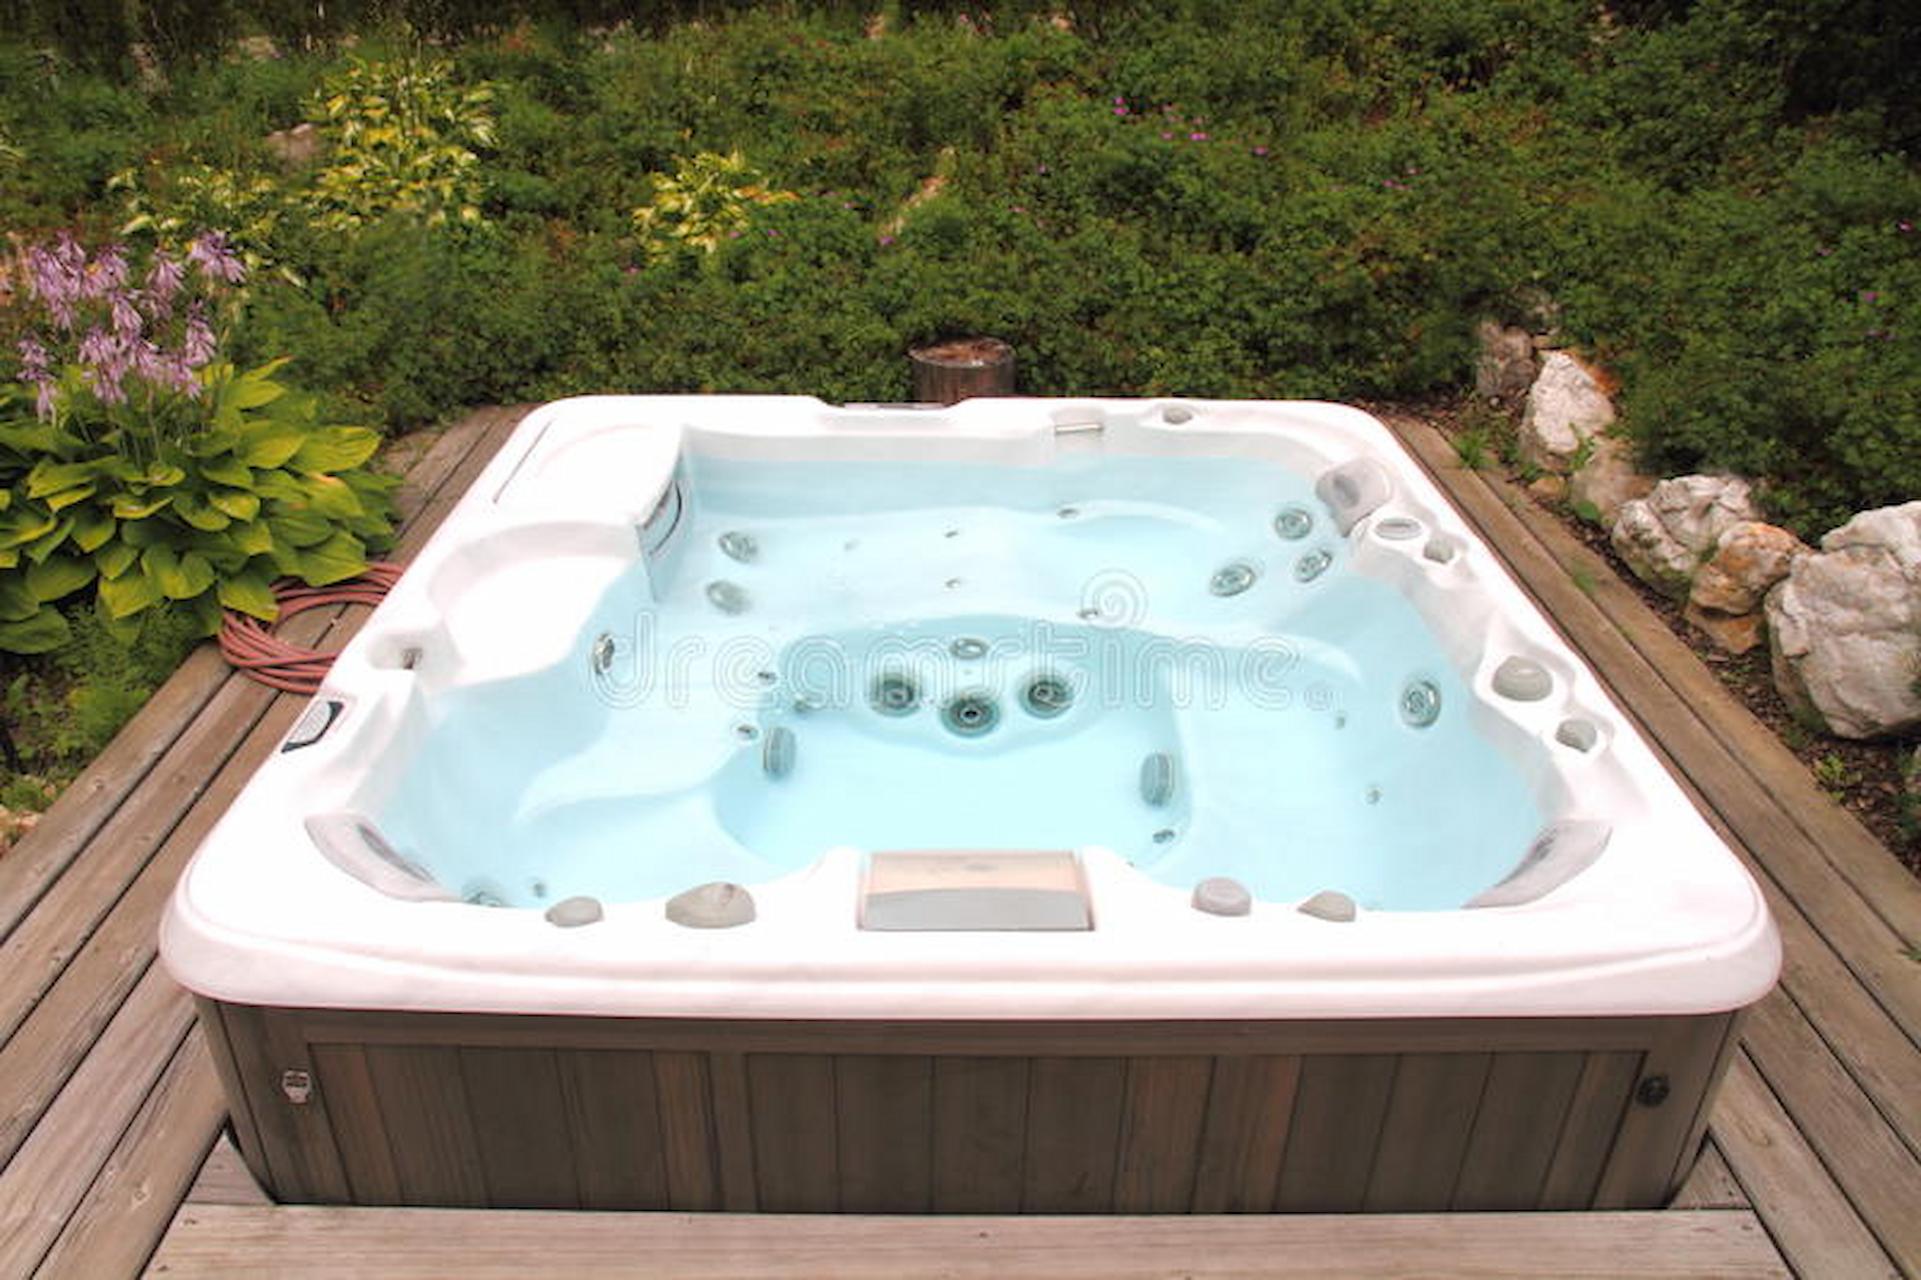 A Guide On Taking Care Of Your Hot Tubs Properly